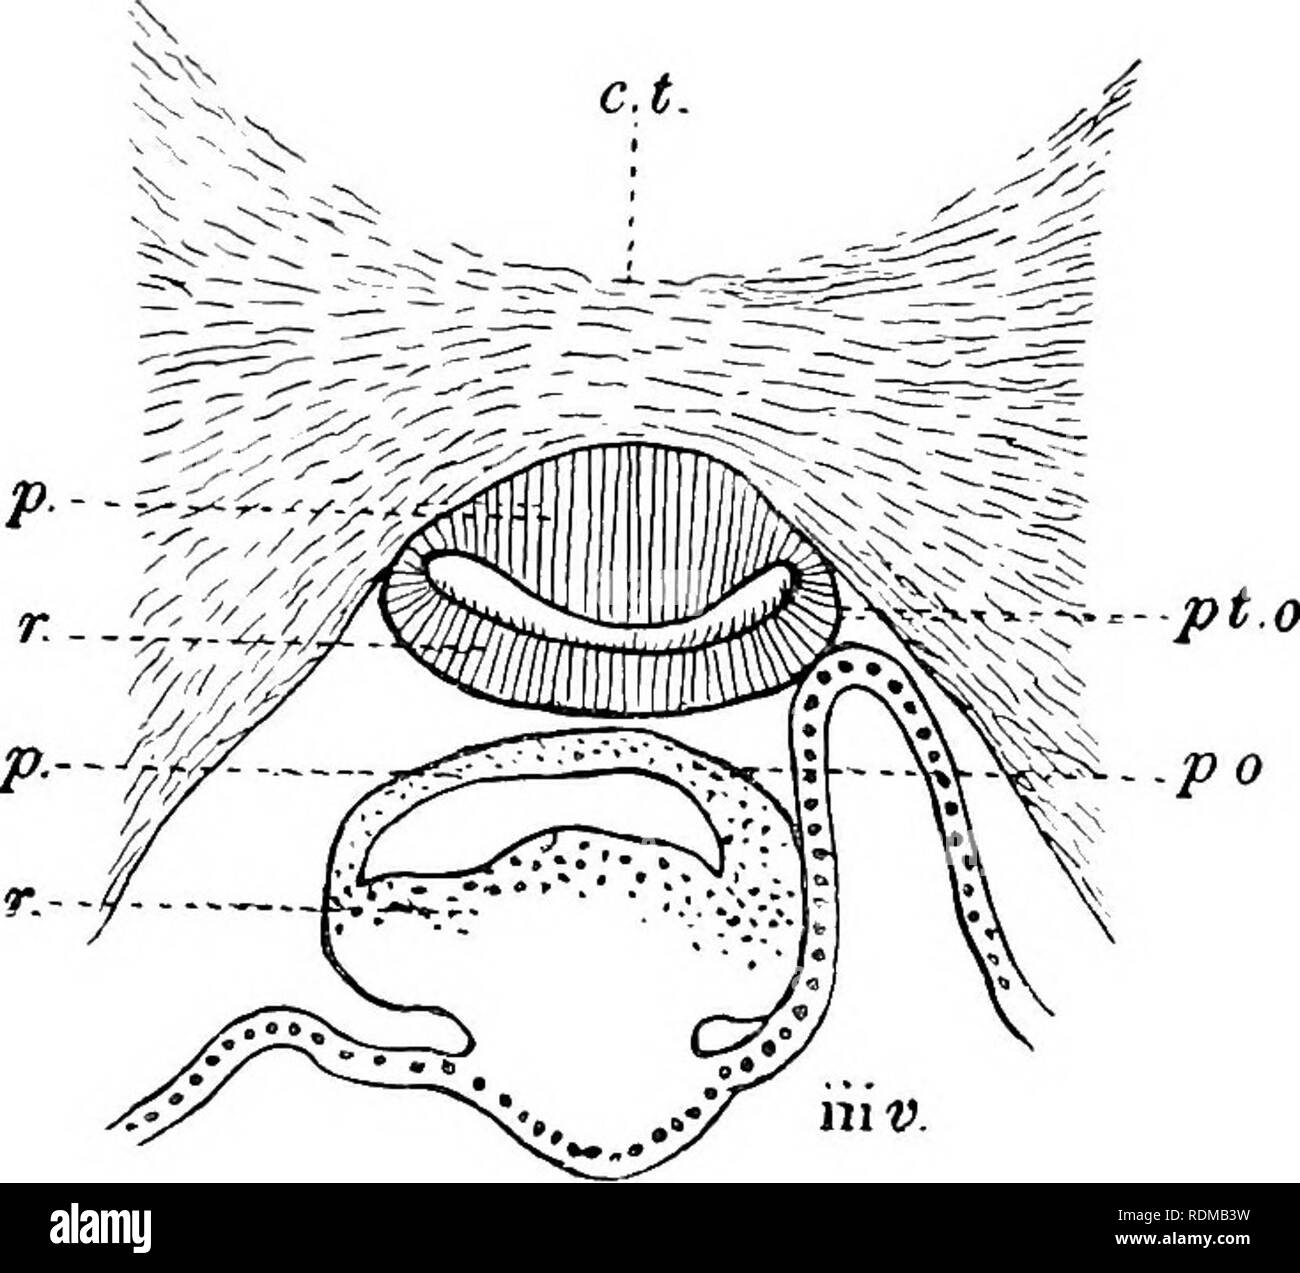 . The Cambridge natural history. Zoology. 396 FISHES CHAP. XIV depressions, but, as a rule, when one of them is present the other is absent. It is probable that both these structures were associated with sensory organs, of which one may have. Fig. 228.—Vertical section through the parietal eye and the pineal vesicle of Petro- myzon mariniKS. c.t. Connective tissue ; p, pellucida ; p.o, pineal organ ; pt,Oj parietal eye ; /•, retina ; iii i&gt;, third ventricle. (From Wiedersheim, after Stud- nicka.) been a parietal eye and the other a pineal eye. Some Teleosts (e.g. many deep-sea Scopelidae) h Stock Photo